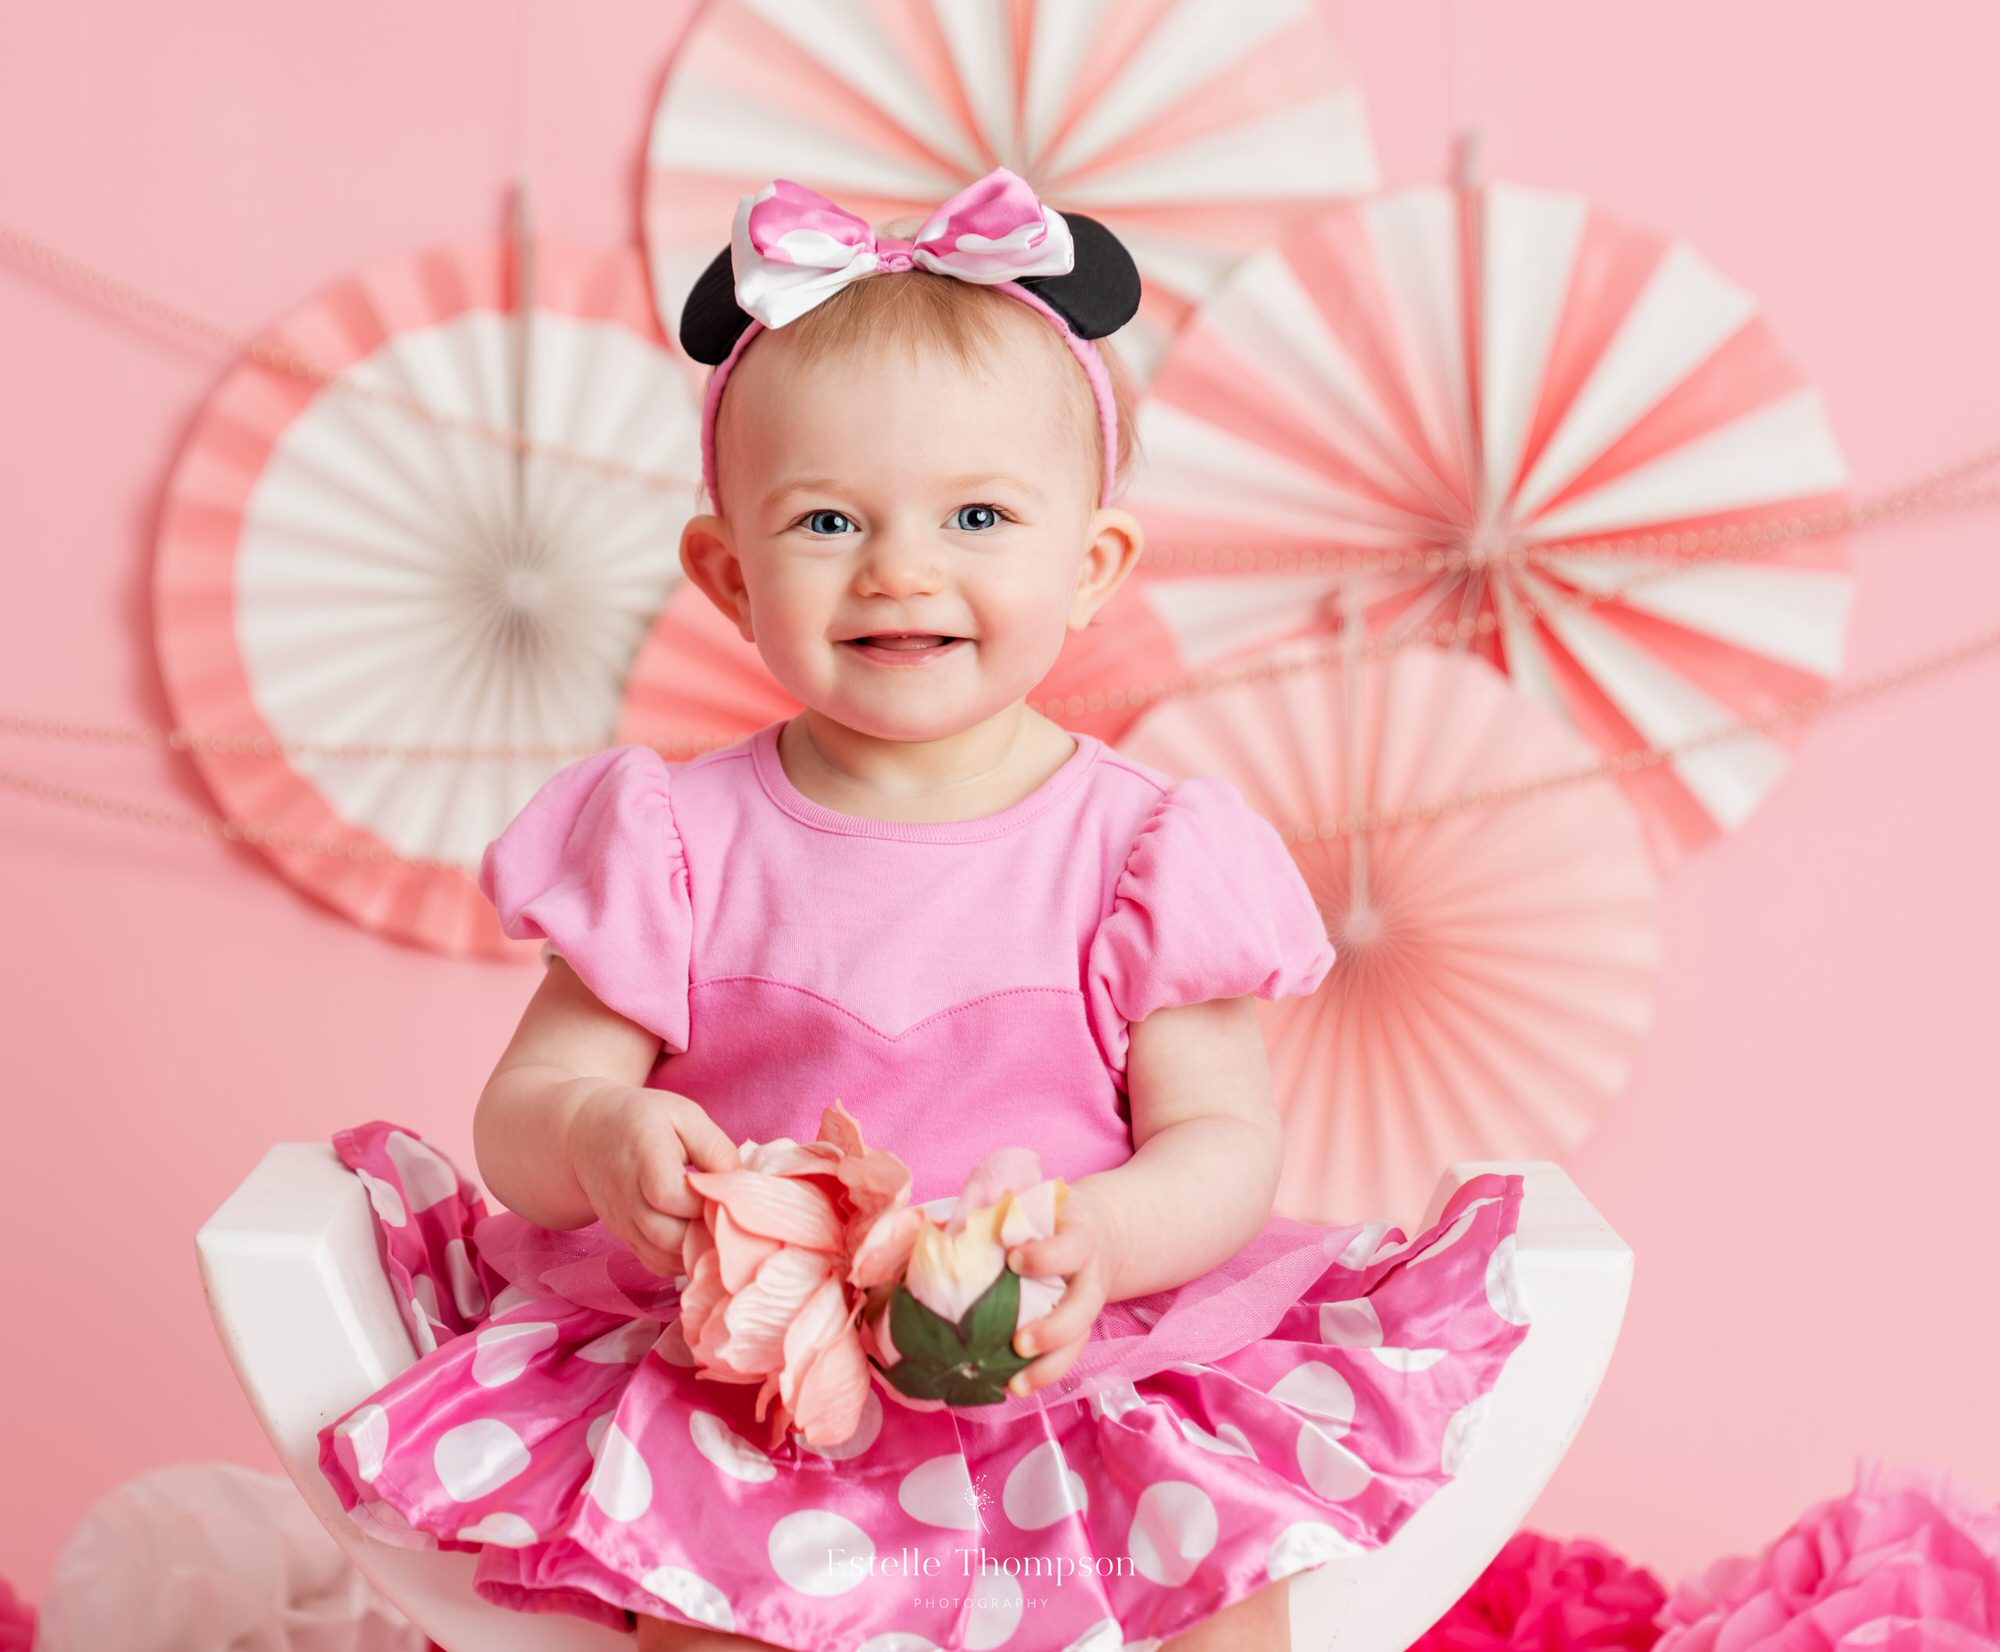 A little girl poses for her first birthday photos in a sevenoaks cake smash